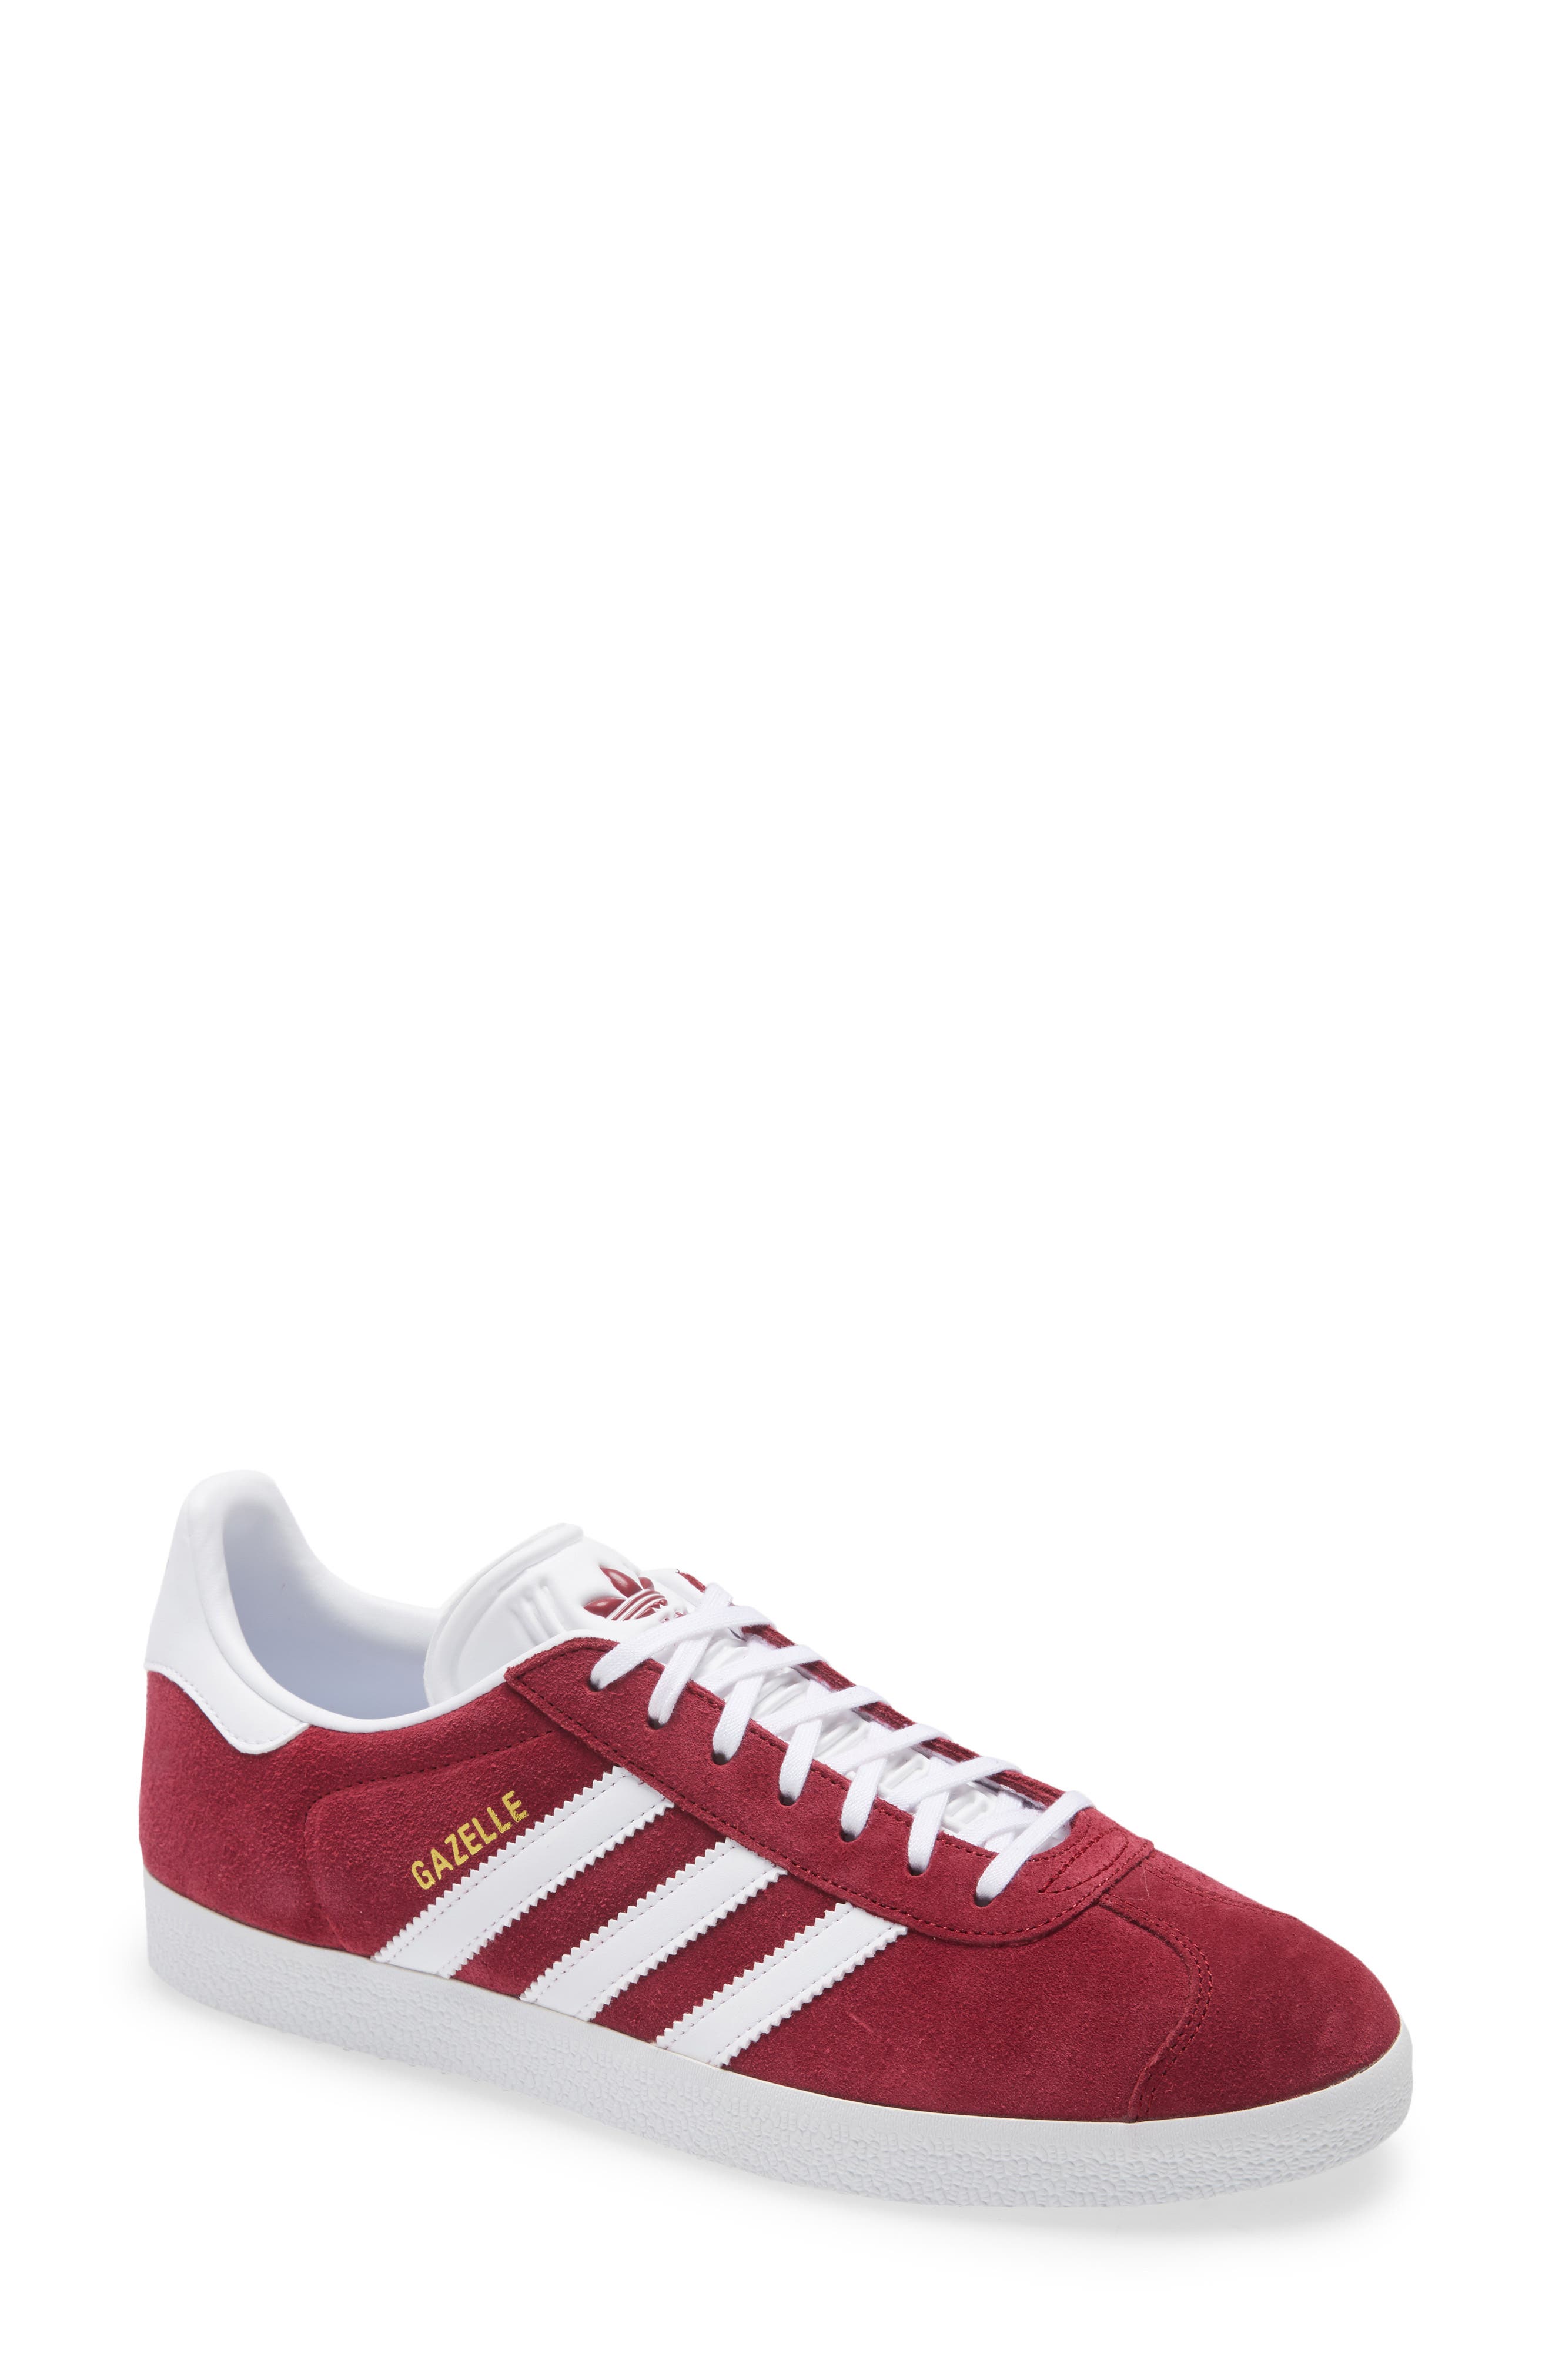 red adidas sneakers